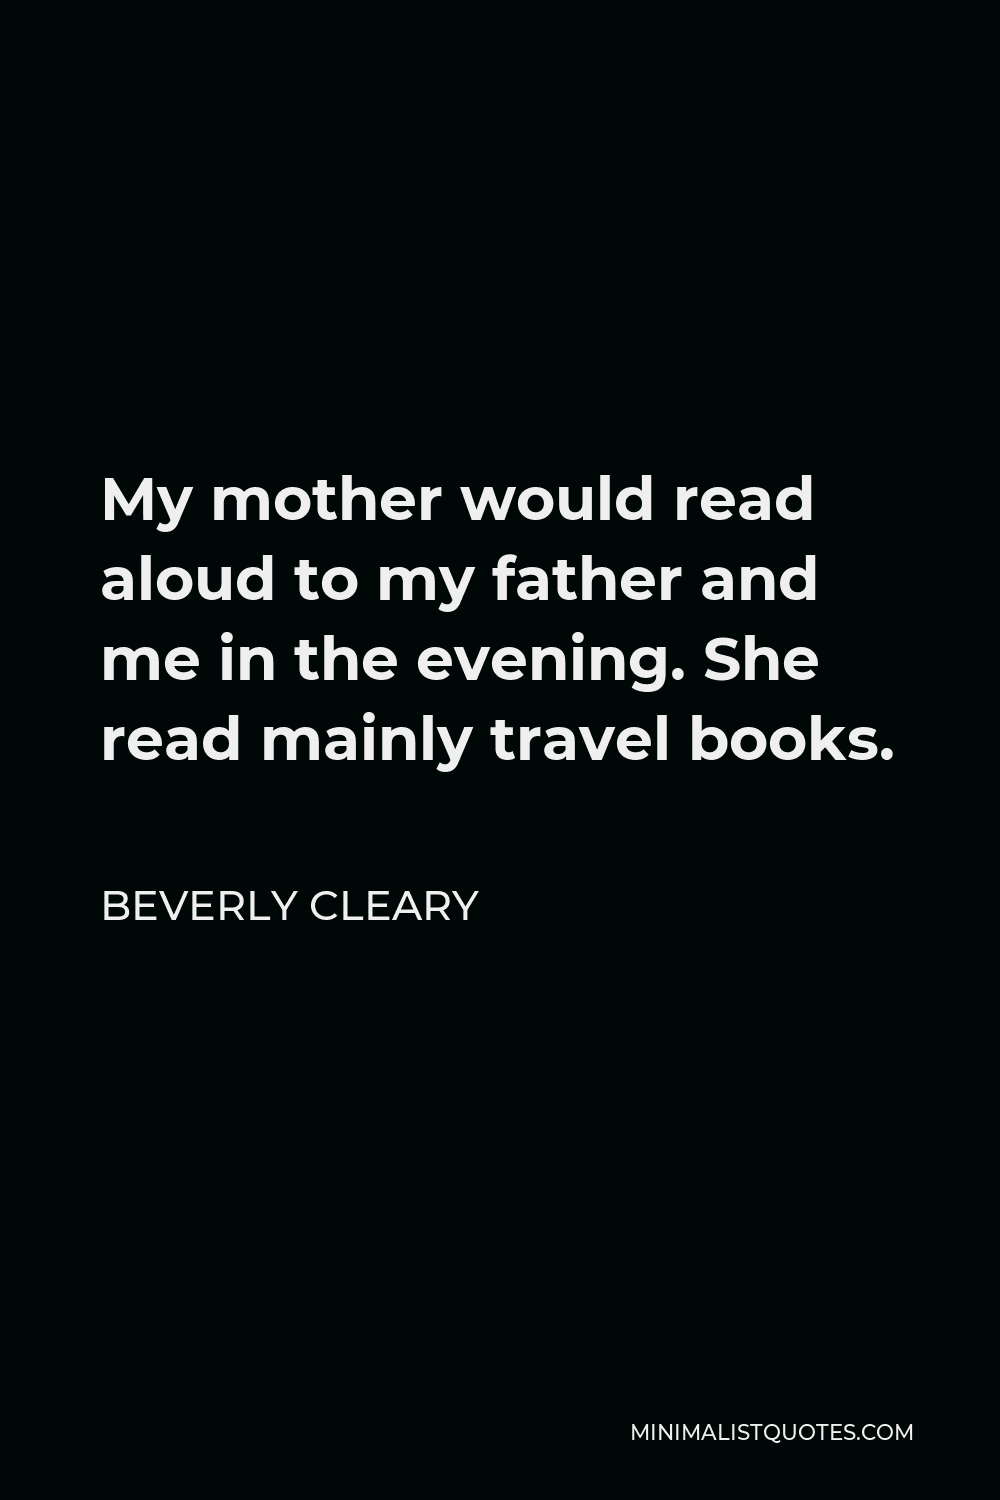 Beverly Cleary Quote - My mother would read aloud to my father and me in the evening. She read mainly travel books.